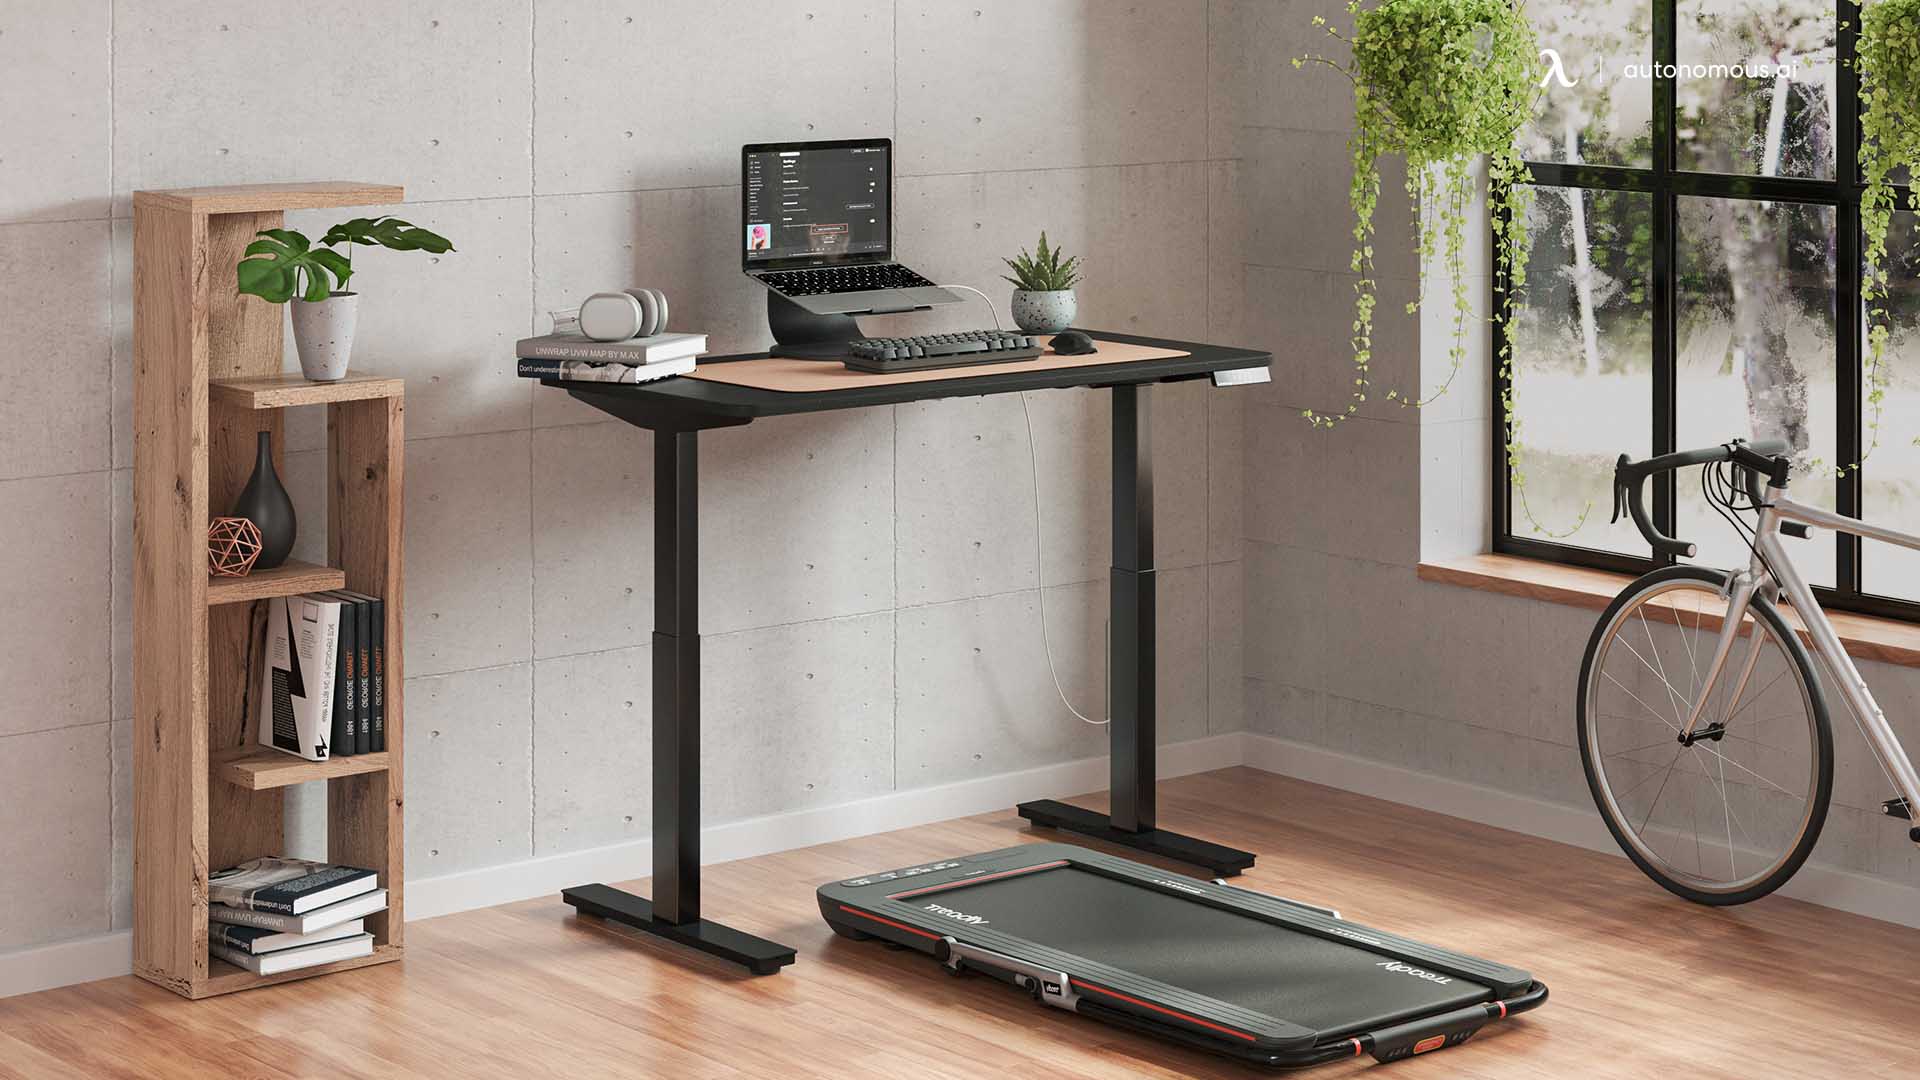 What is a Treadmill Desk? Its Pros and Cons